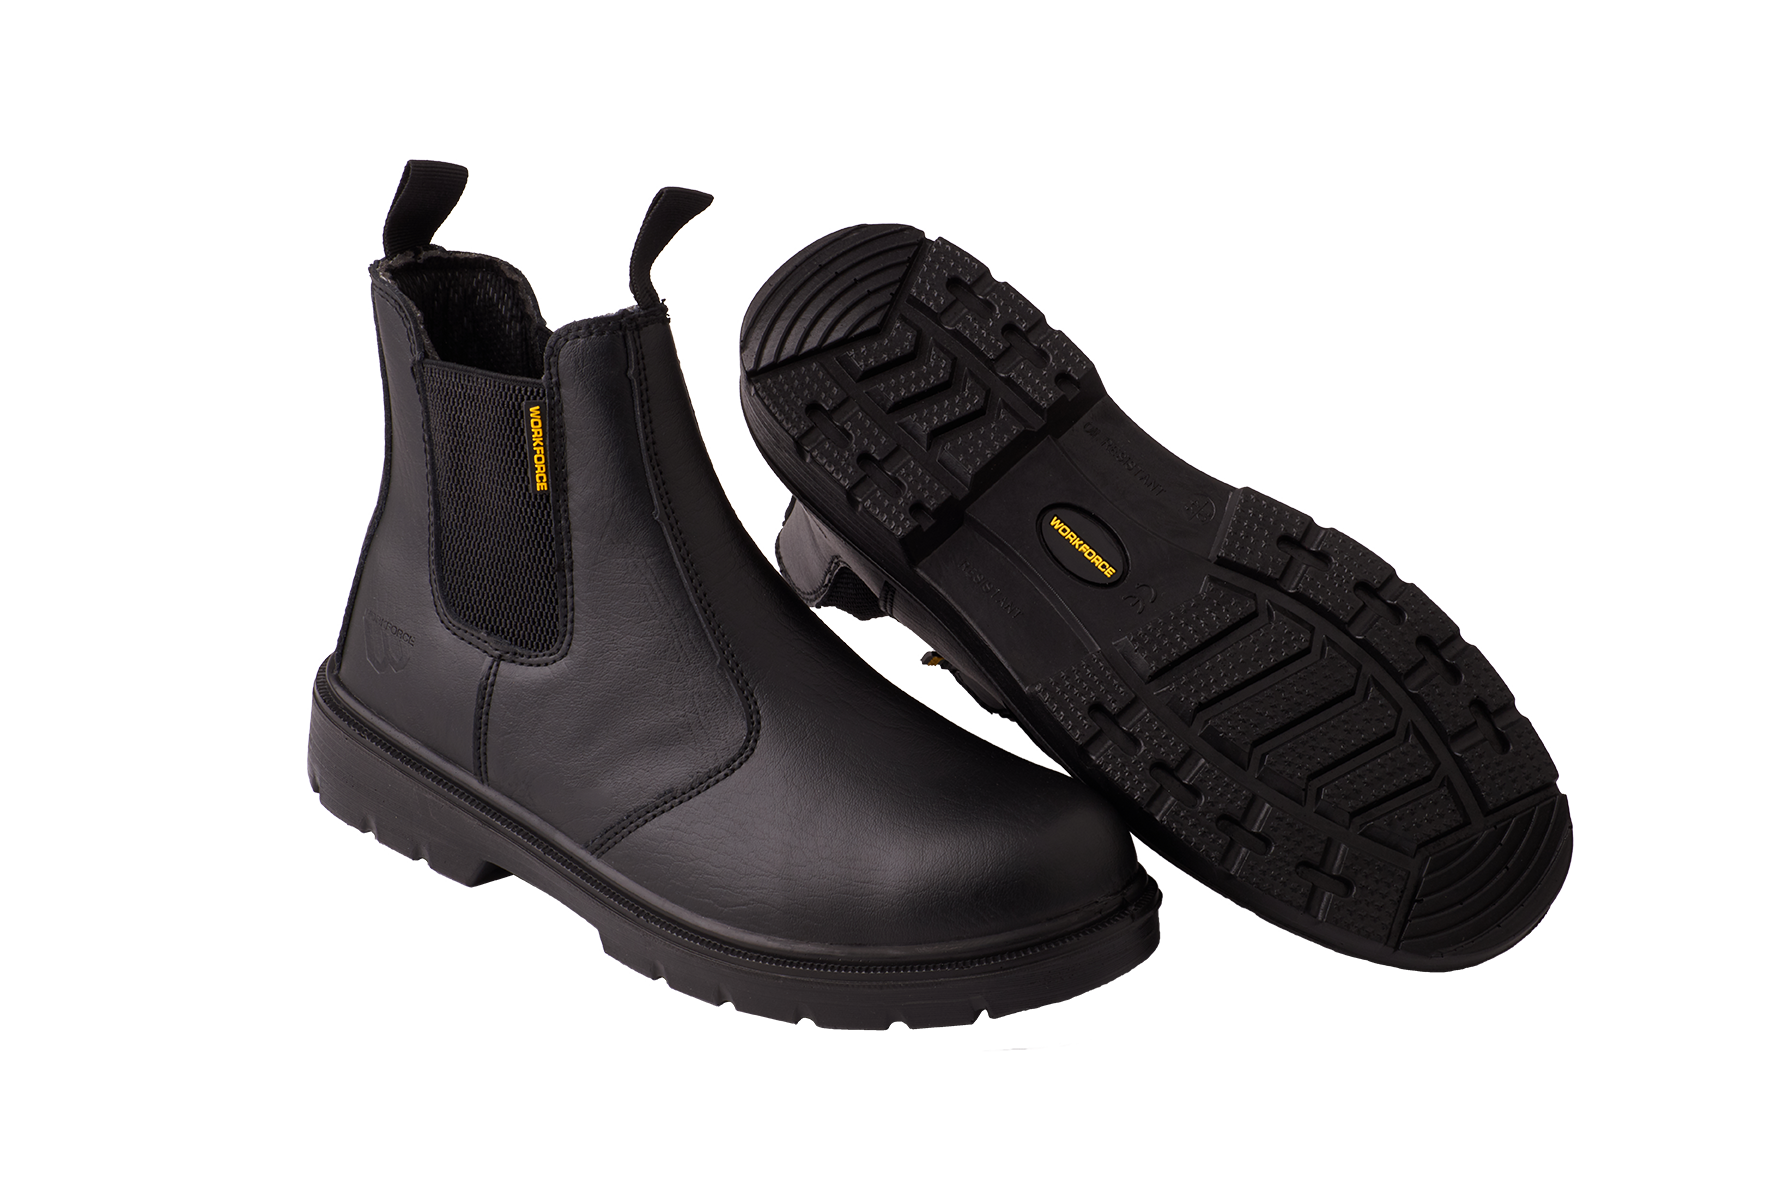 WORKFORCE SAFETY DEALER BOOT S1P/SRC RATED FOR MAXIMUM SAFETY (WF17)